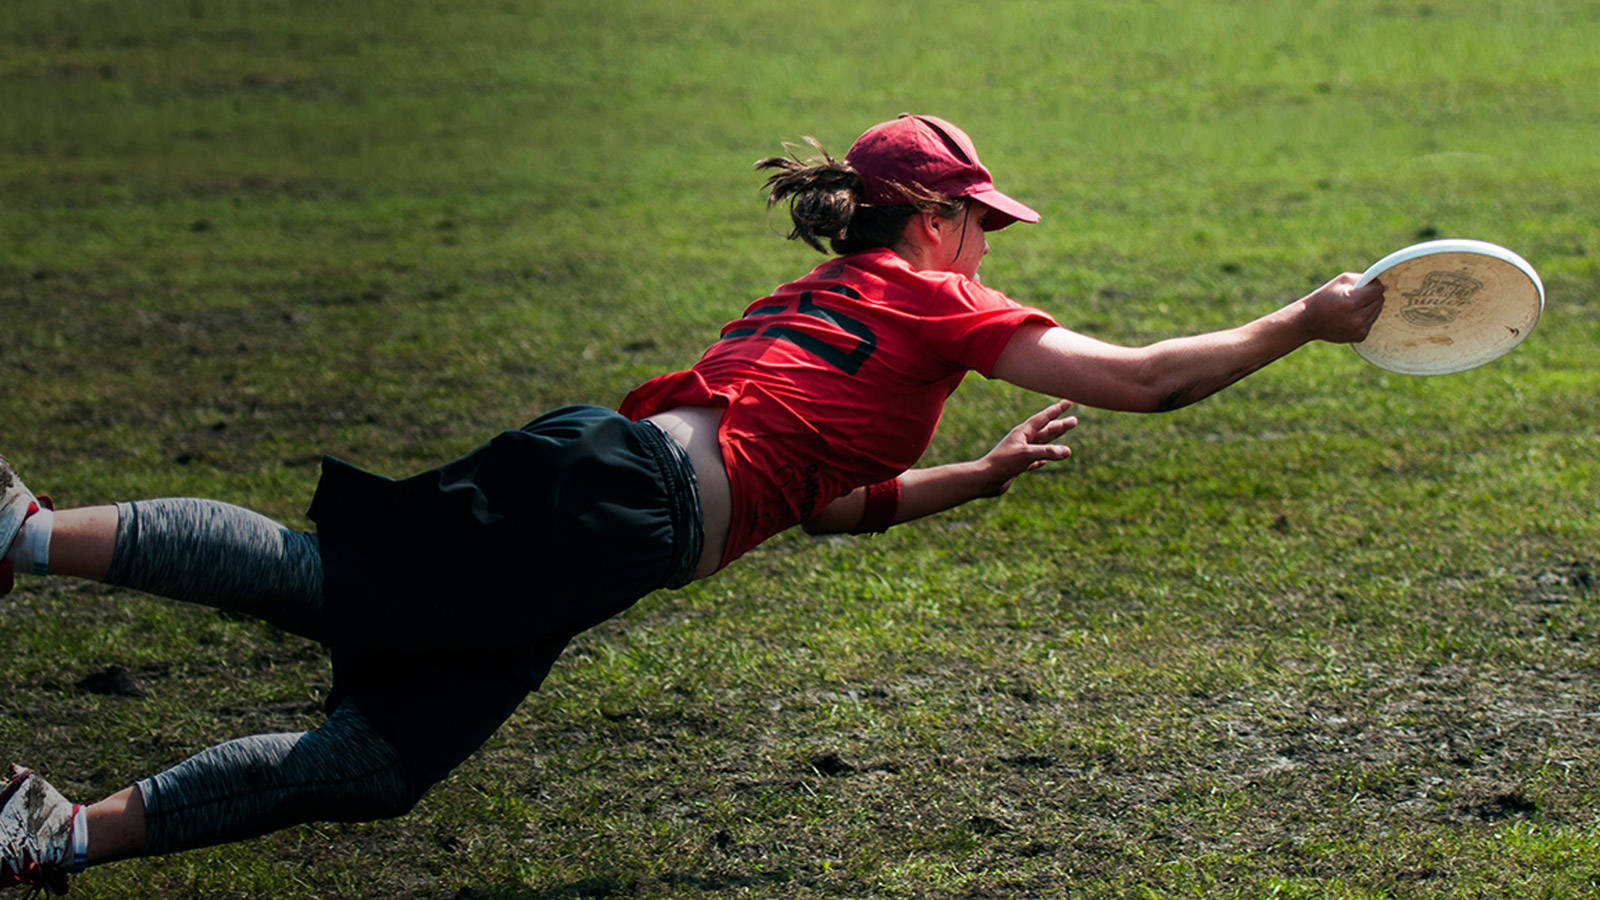 Top 999+ Ultimate Frisbee Wallpaper Full HD, 4K Free to Use